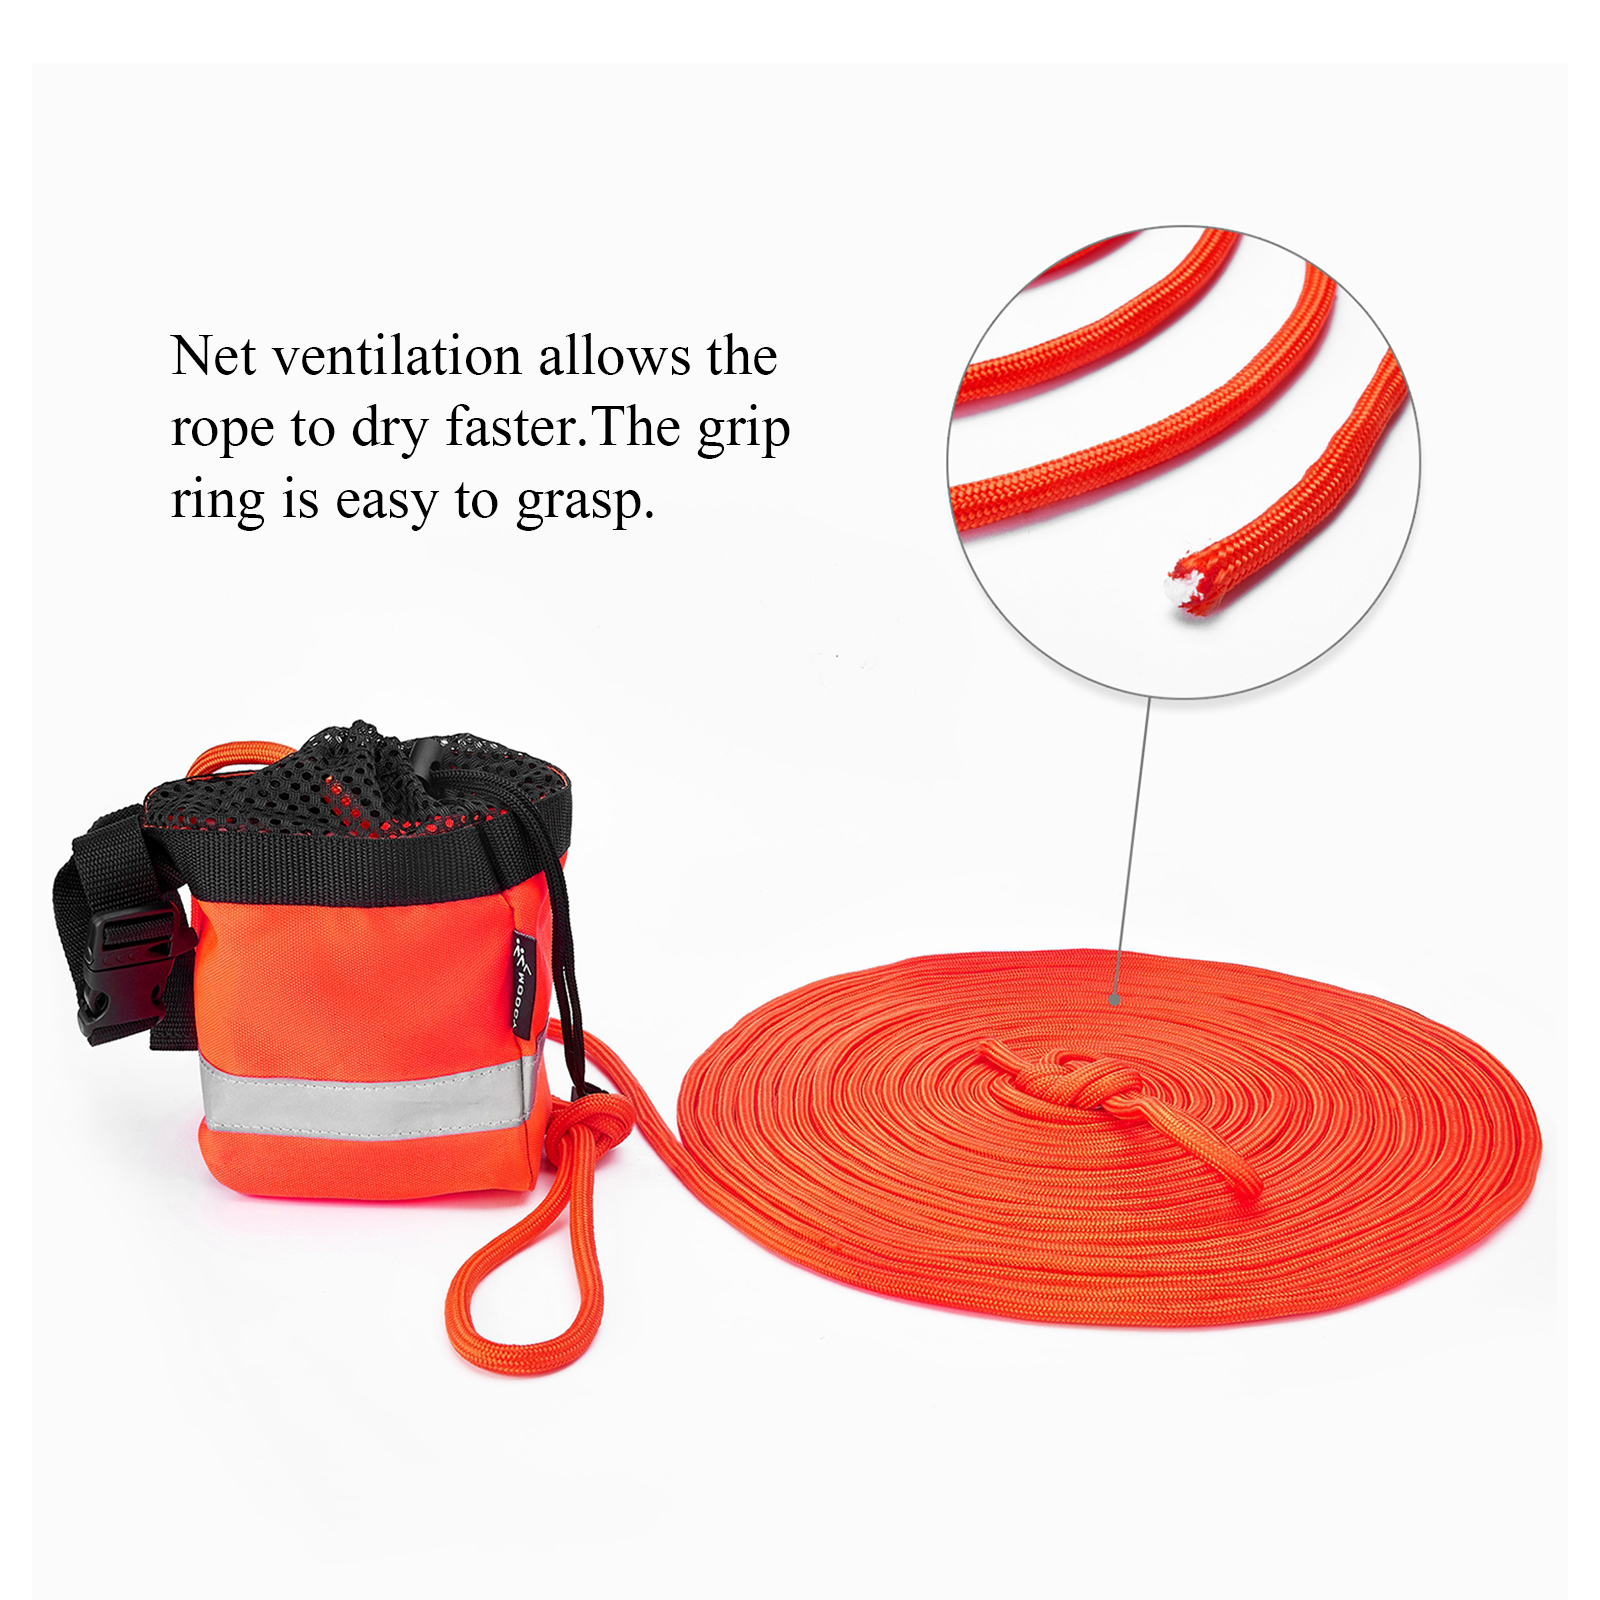 Boating and Rafting MOPHOEXII Water Rescue Throw Bag with 15m/30m Floating Life Line for Kayaking Safety Equipment 